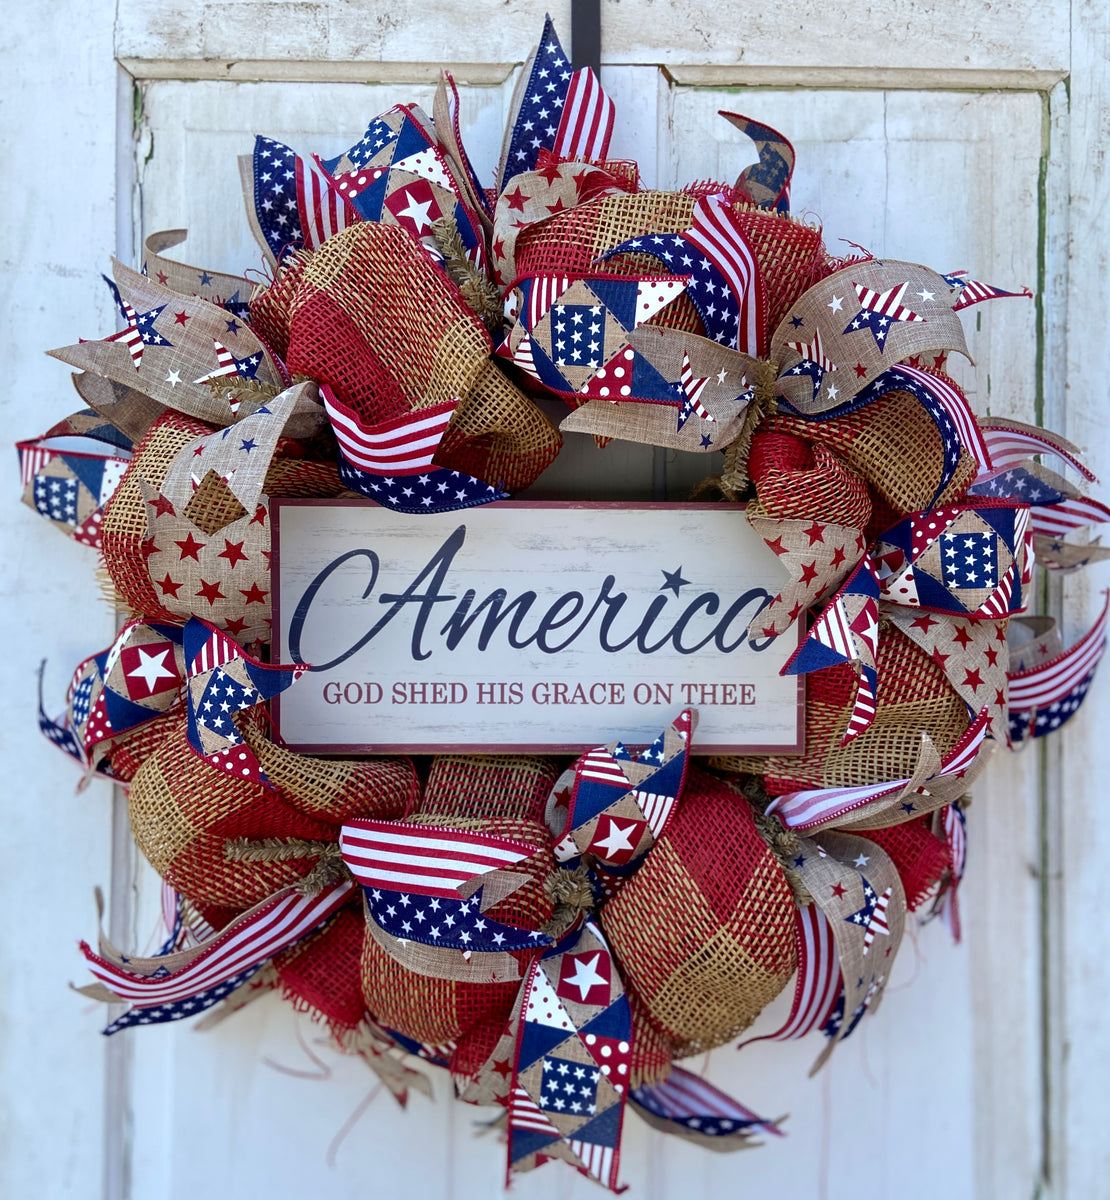 How To Make A Patriotic Deco Mesh And Ribbon Wreath With Wire Frame 